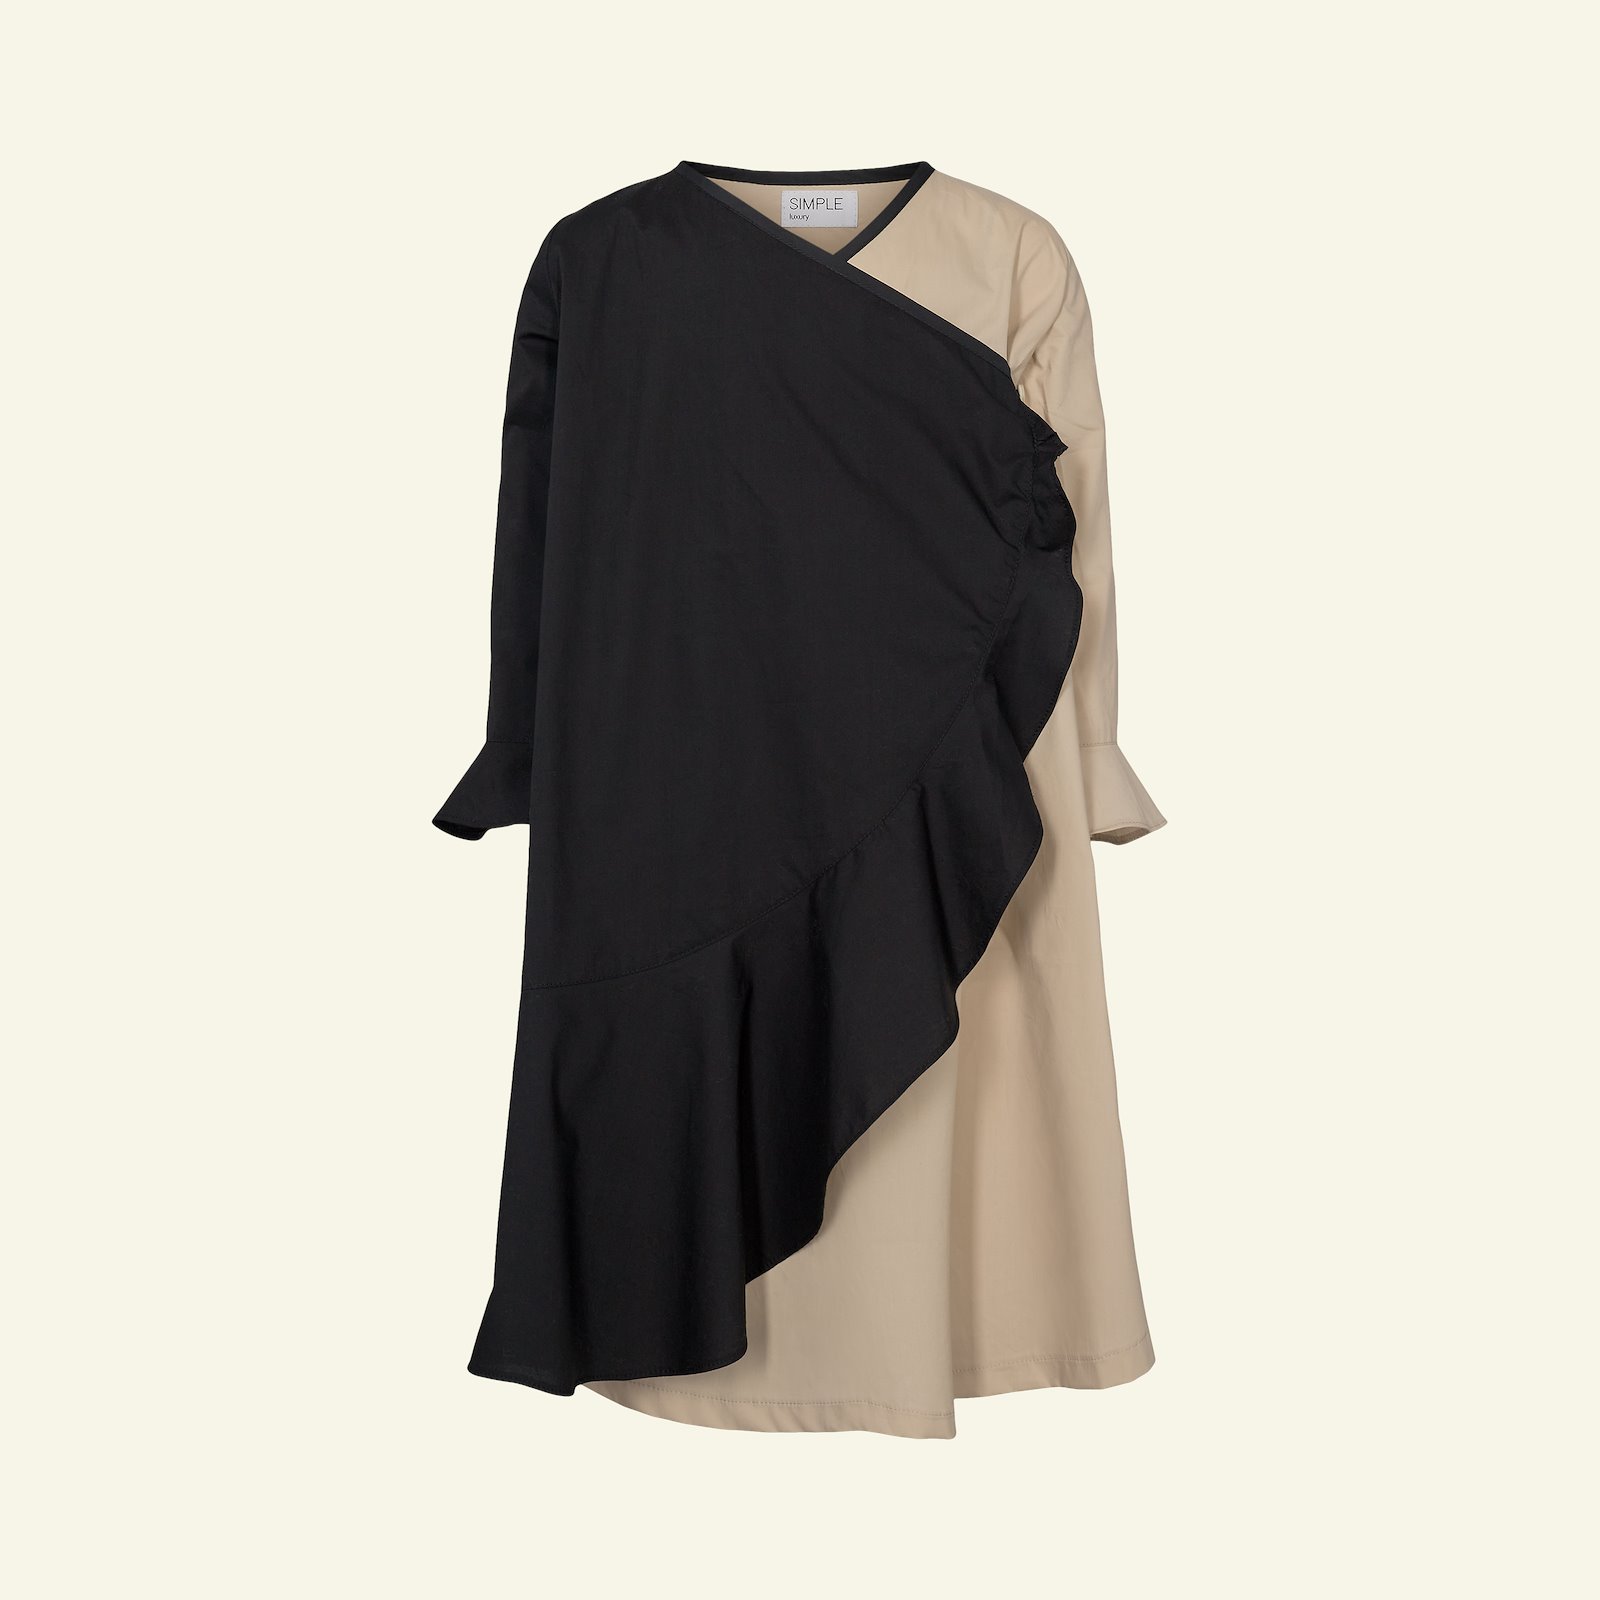 Dress und blouse with flounce, 140/10y p63066_540110_510112_64080_24865_sskit